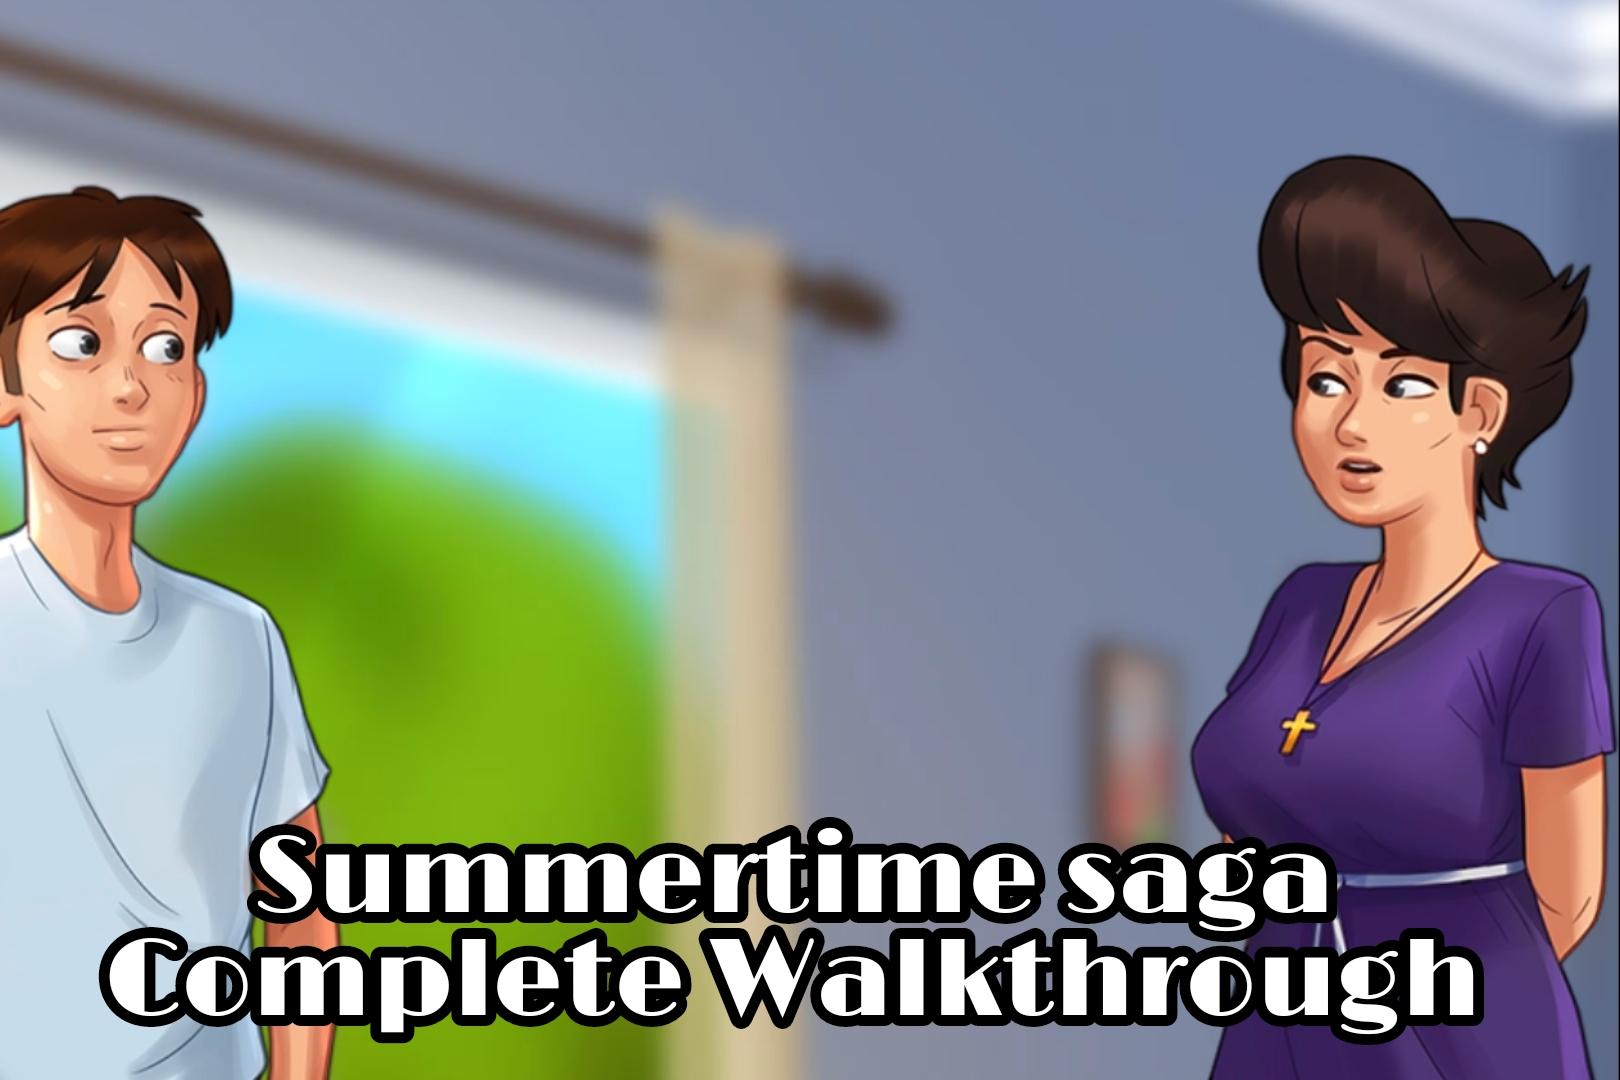 Summertime Saga With Complete Walkthrough Apk For Android Download